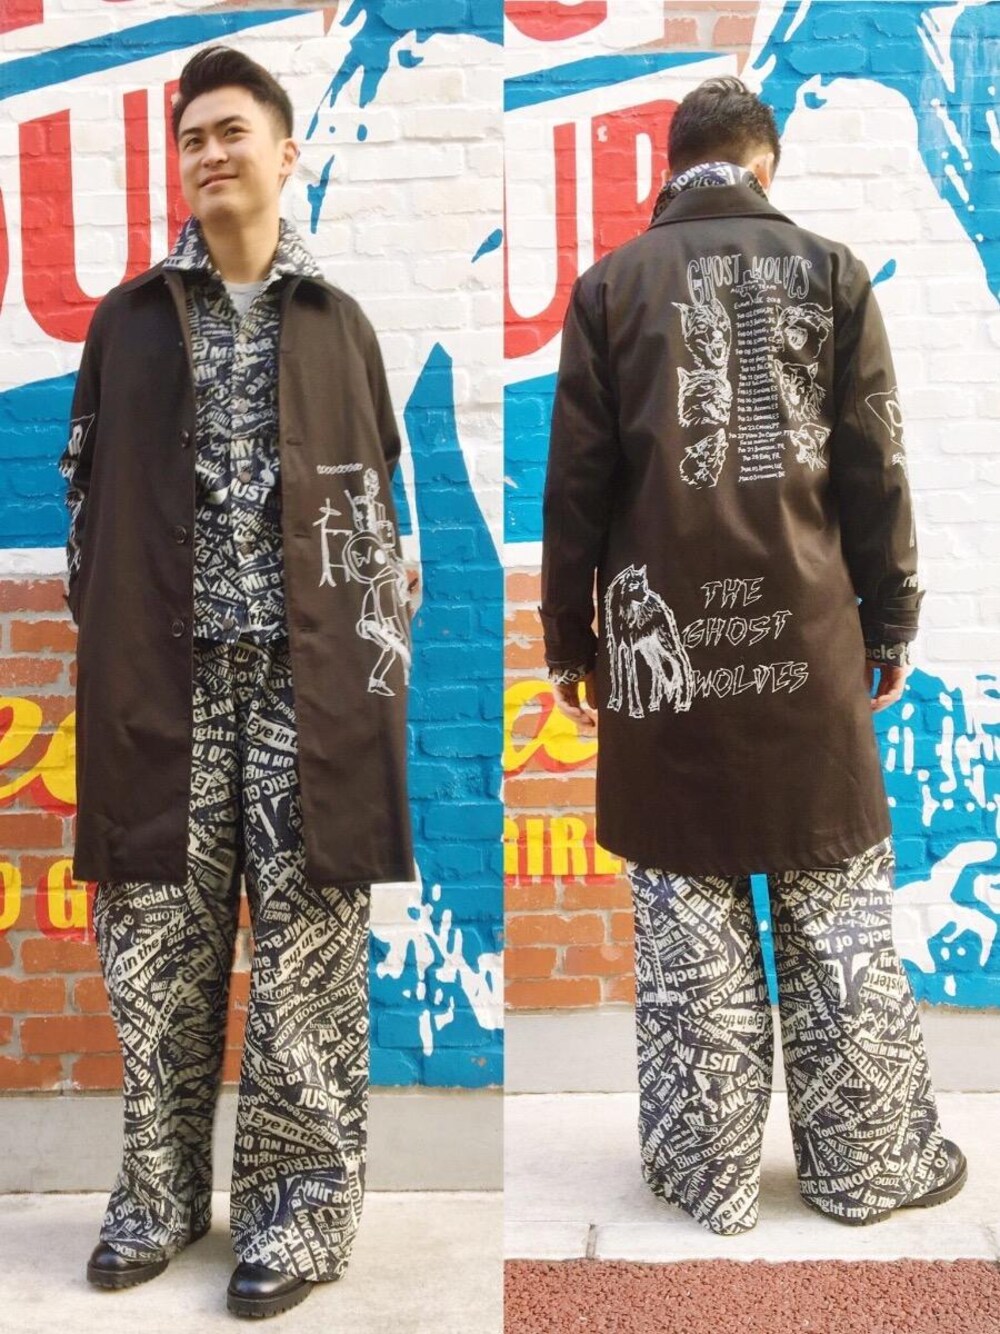 HYSTERIC GLAMOUR（ヒステリックグラマー）の「THE GHOST WOLVES/POLAR 